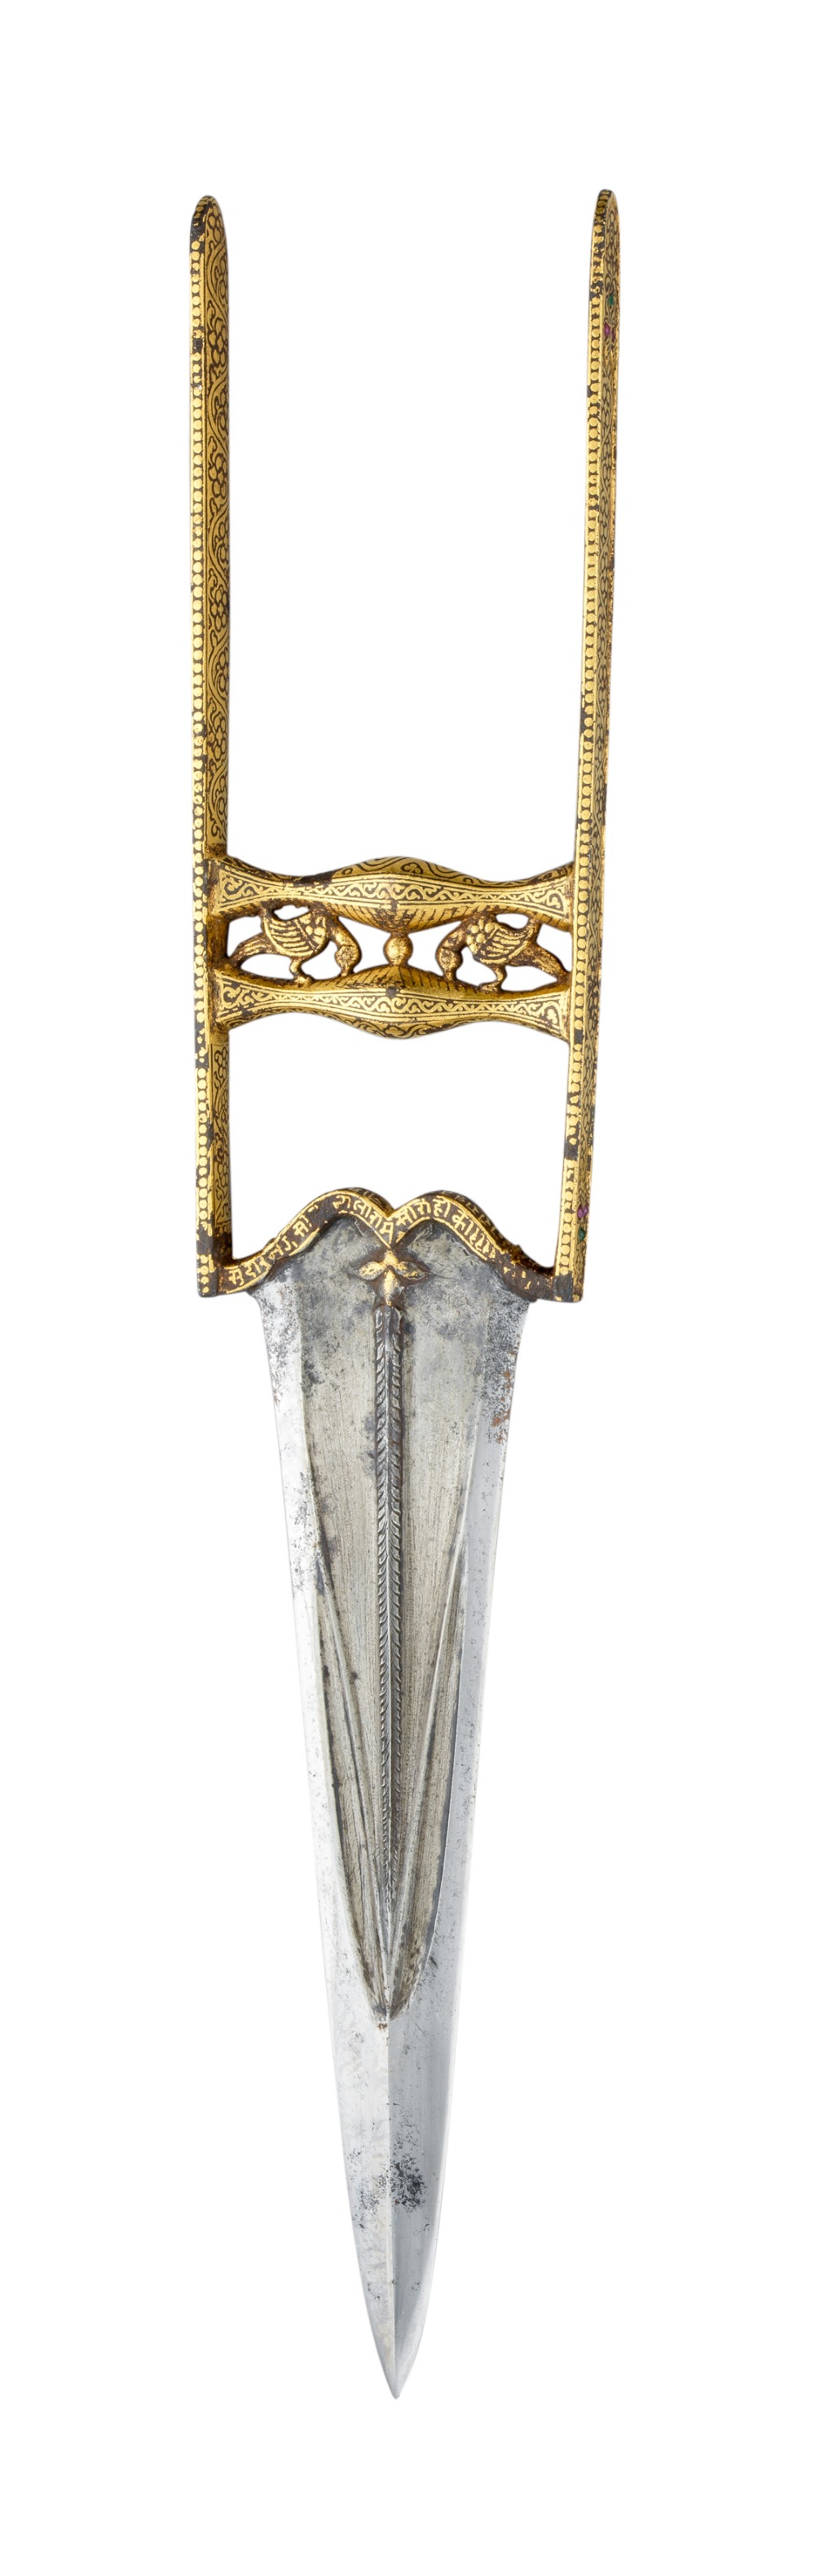 AN INDIAN DAGGAR (KATAR), 18TH CENTURY with strongly tapering blade formed with a reinforced tip,